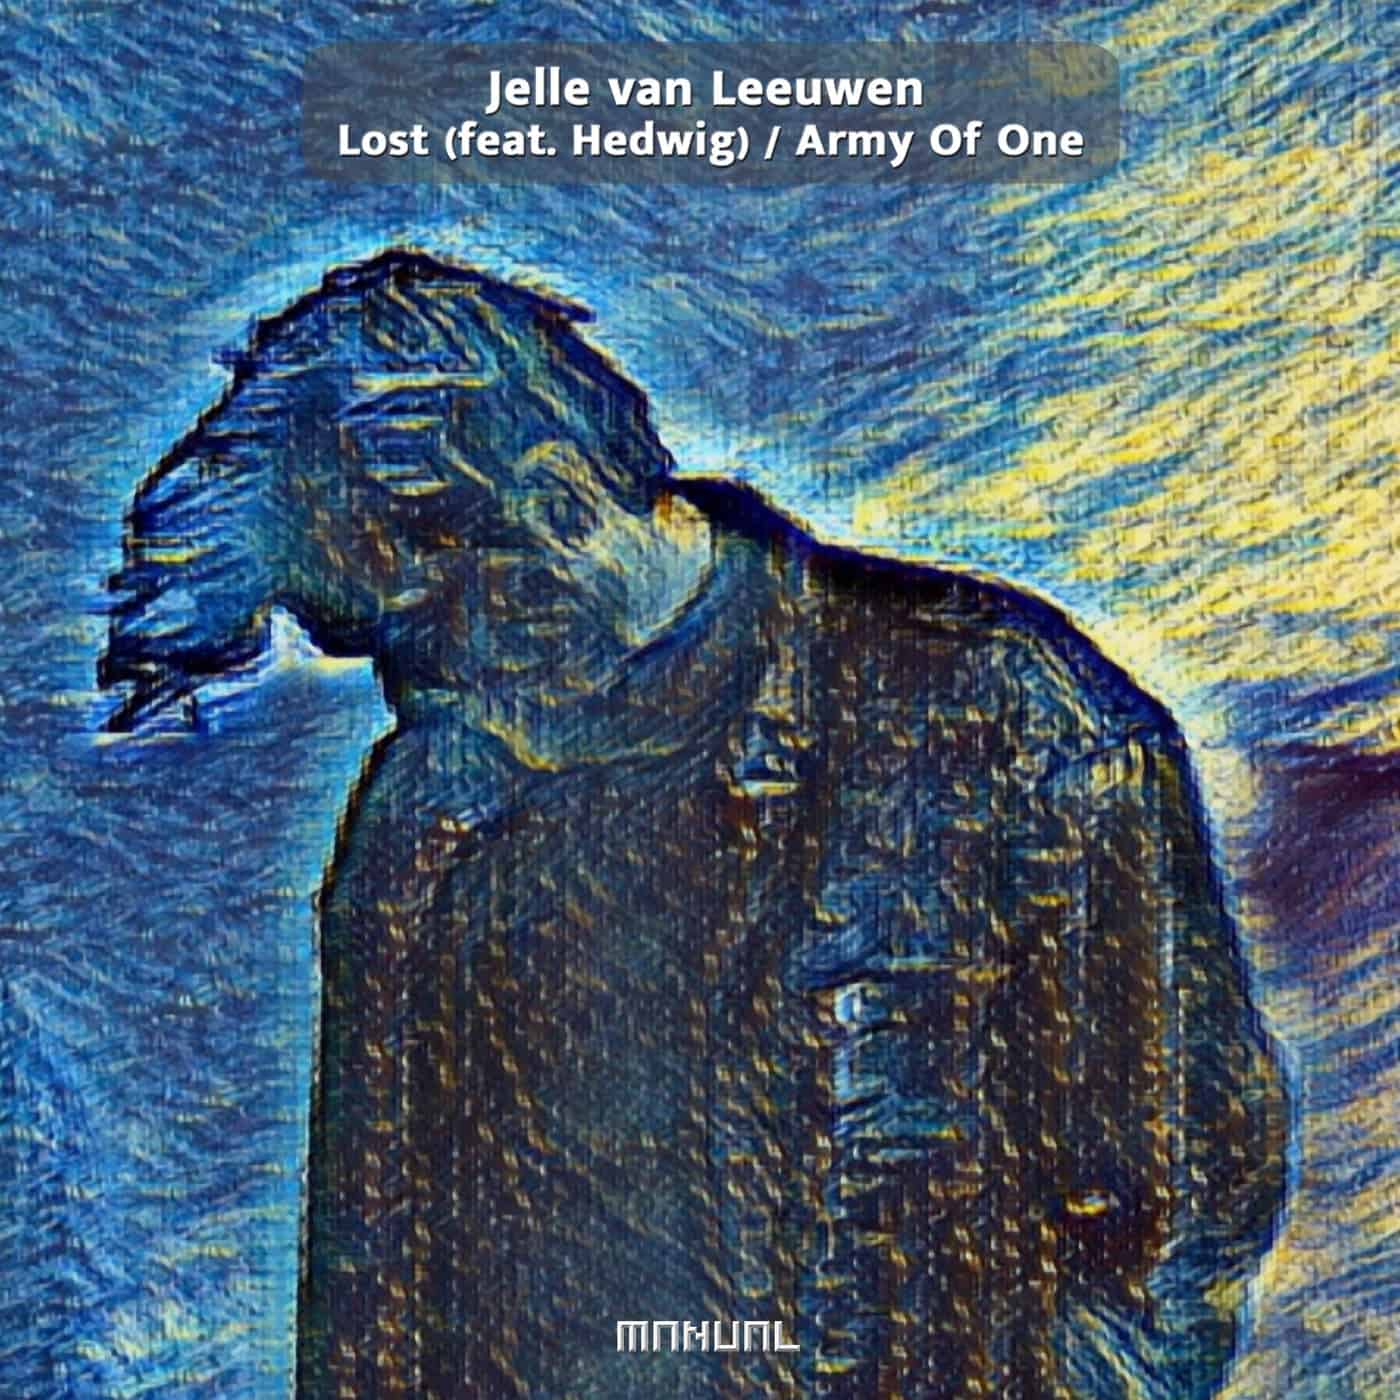 image cover: Hedwig, Jelle van Leeuwen - Lost / Army Of One / MAN383